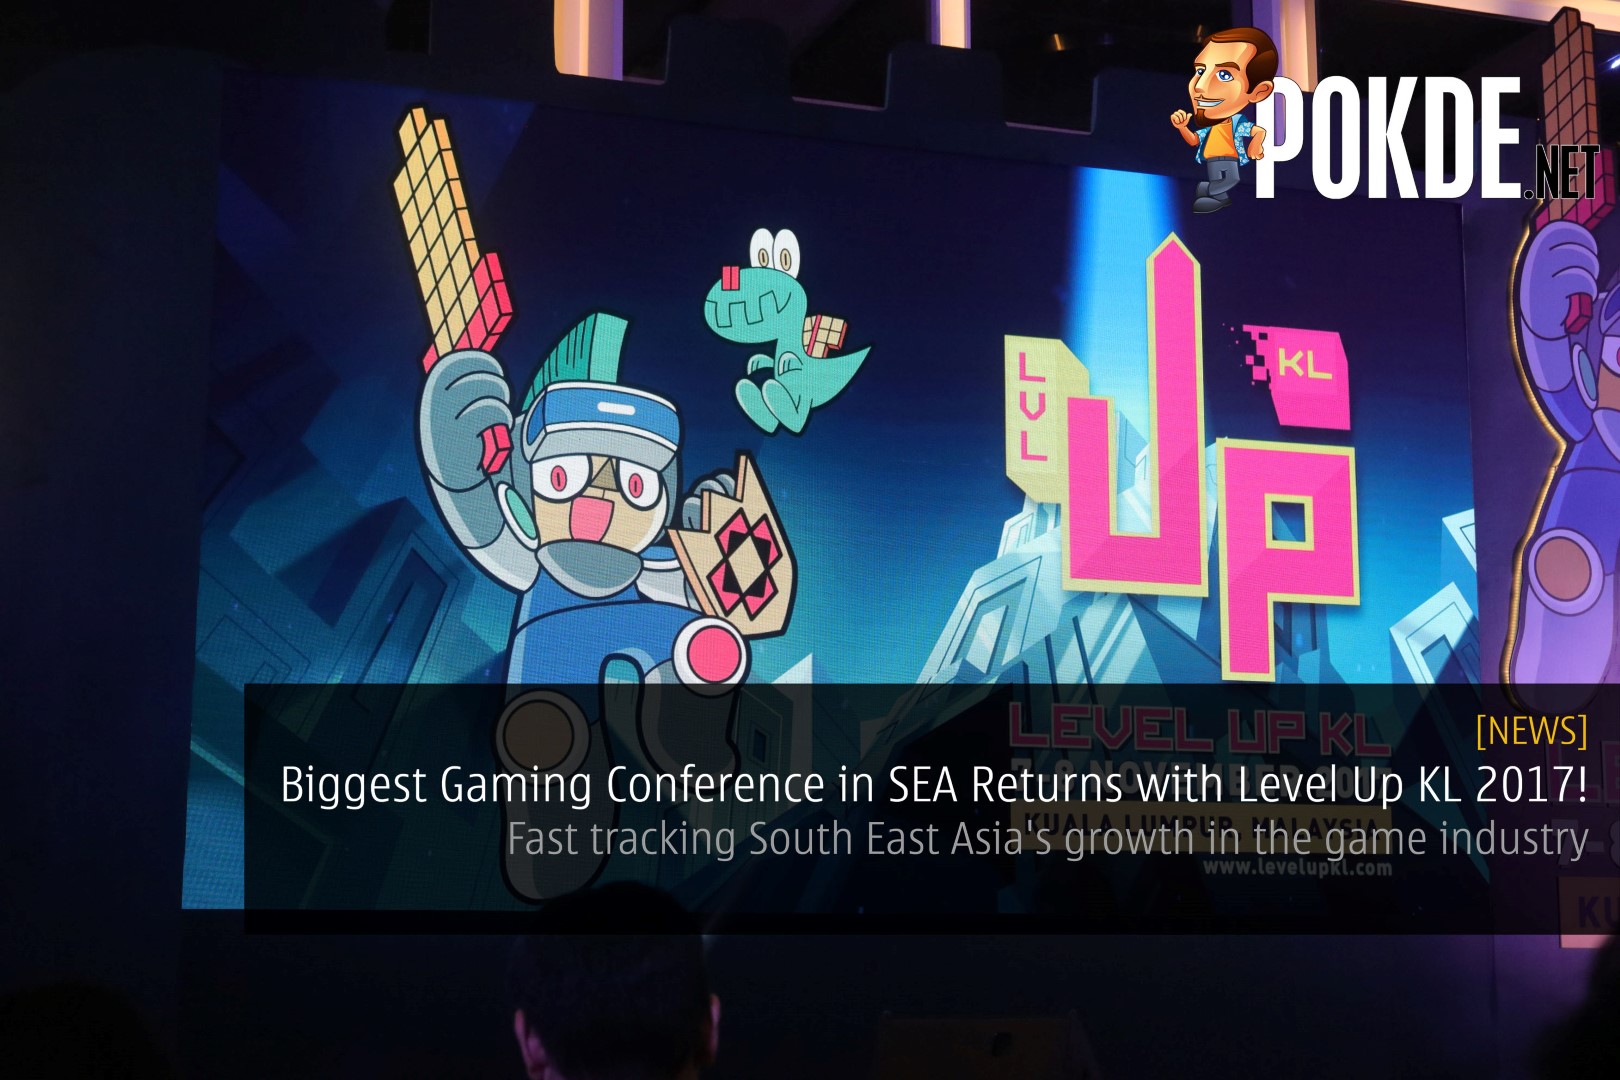 Biggest Gaming Conference in SEA Returns with Level Up KL 2017! - Fast tracking South East Asia's growth in the game industry 27